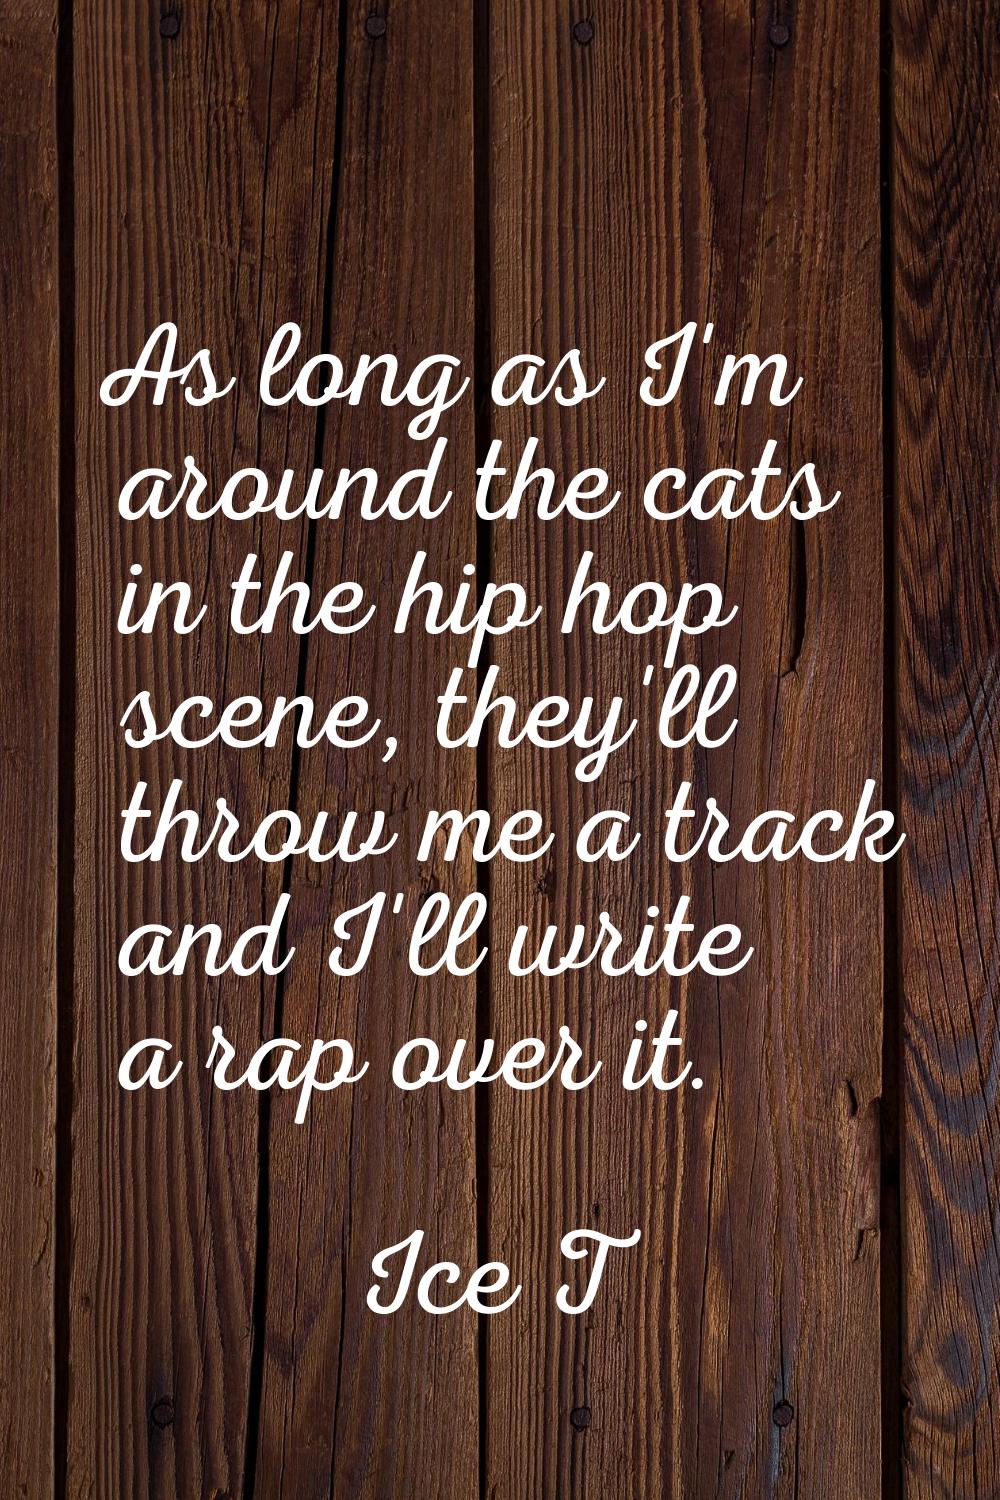 As long as I'm around the cats in the hip hop scene, they'll throw me a track and I'll write a rap 